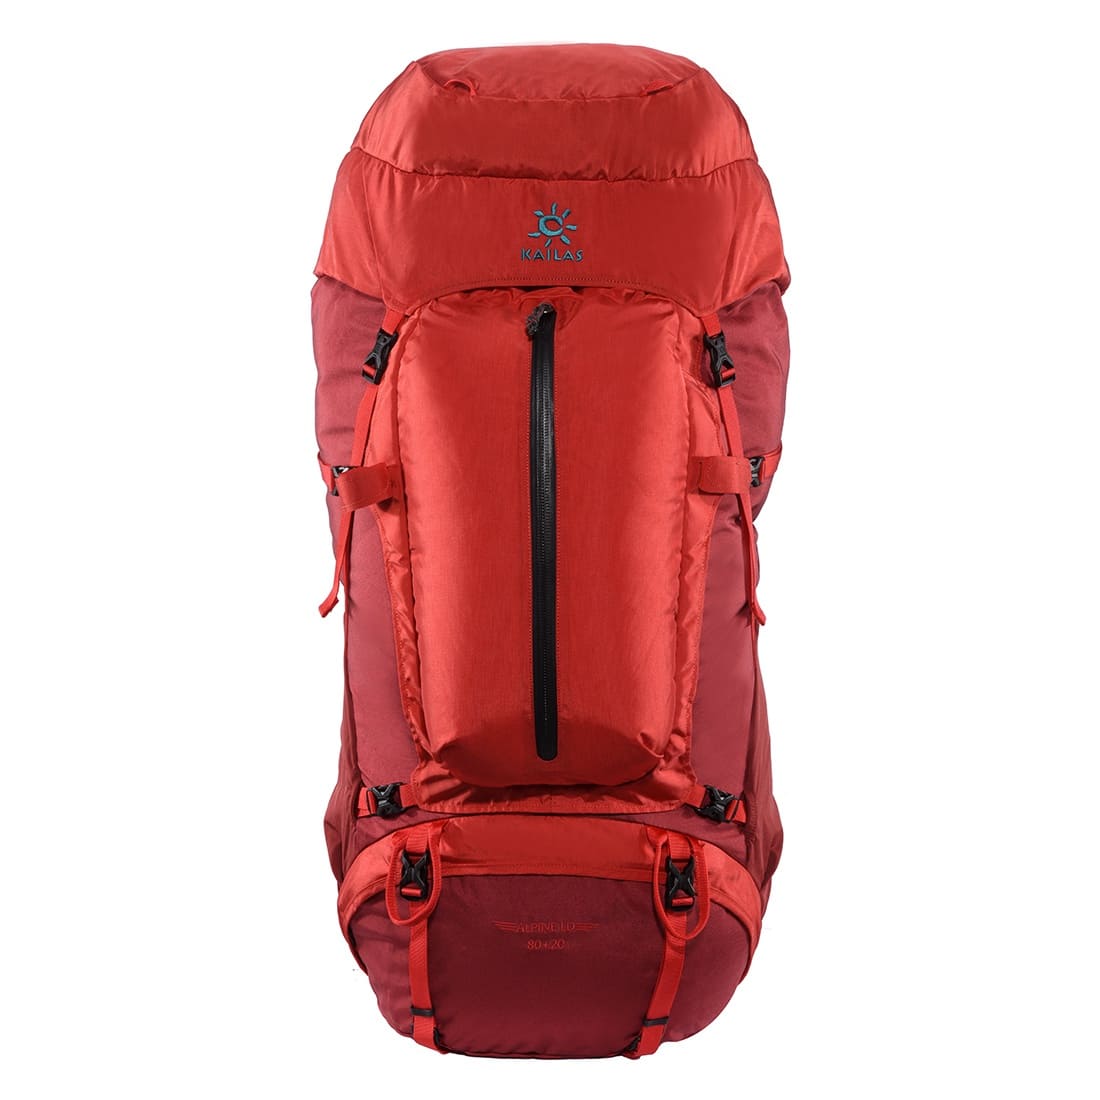 Kailas Alpine Guide Hiking Backpack Unisex 80+20